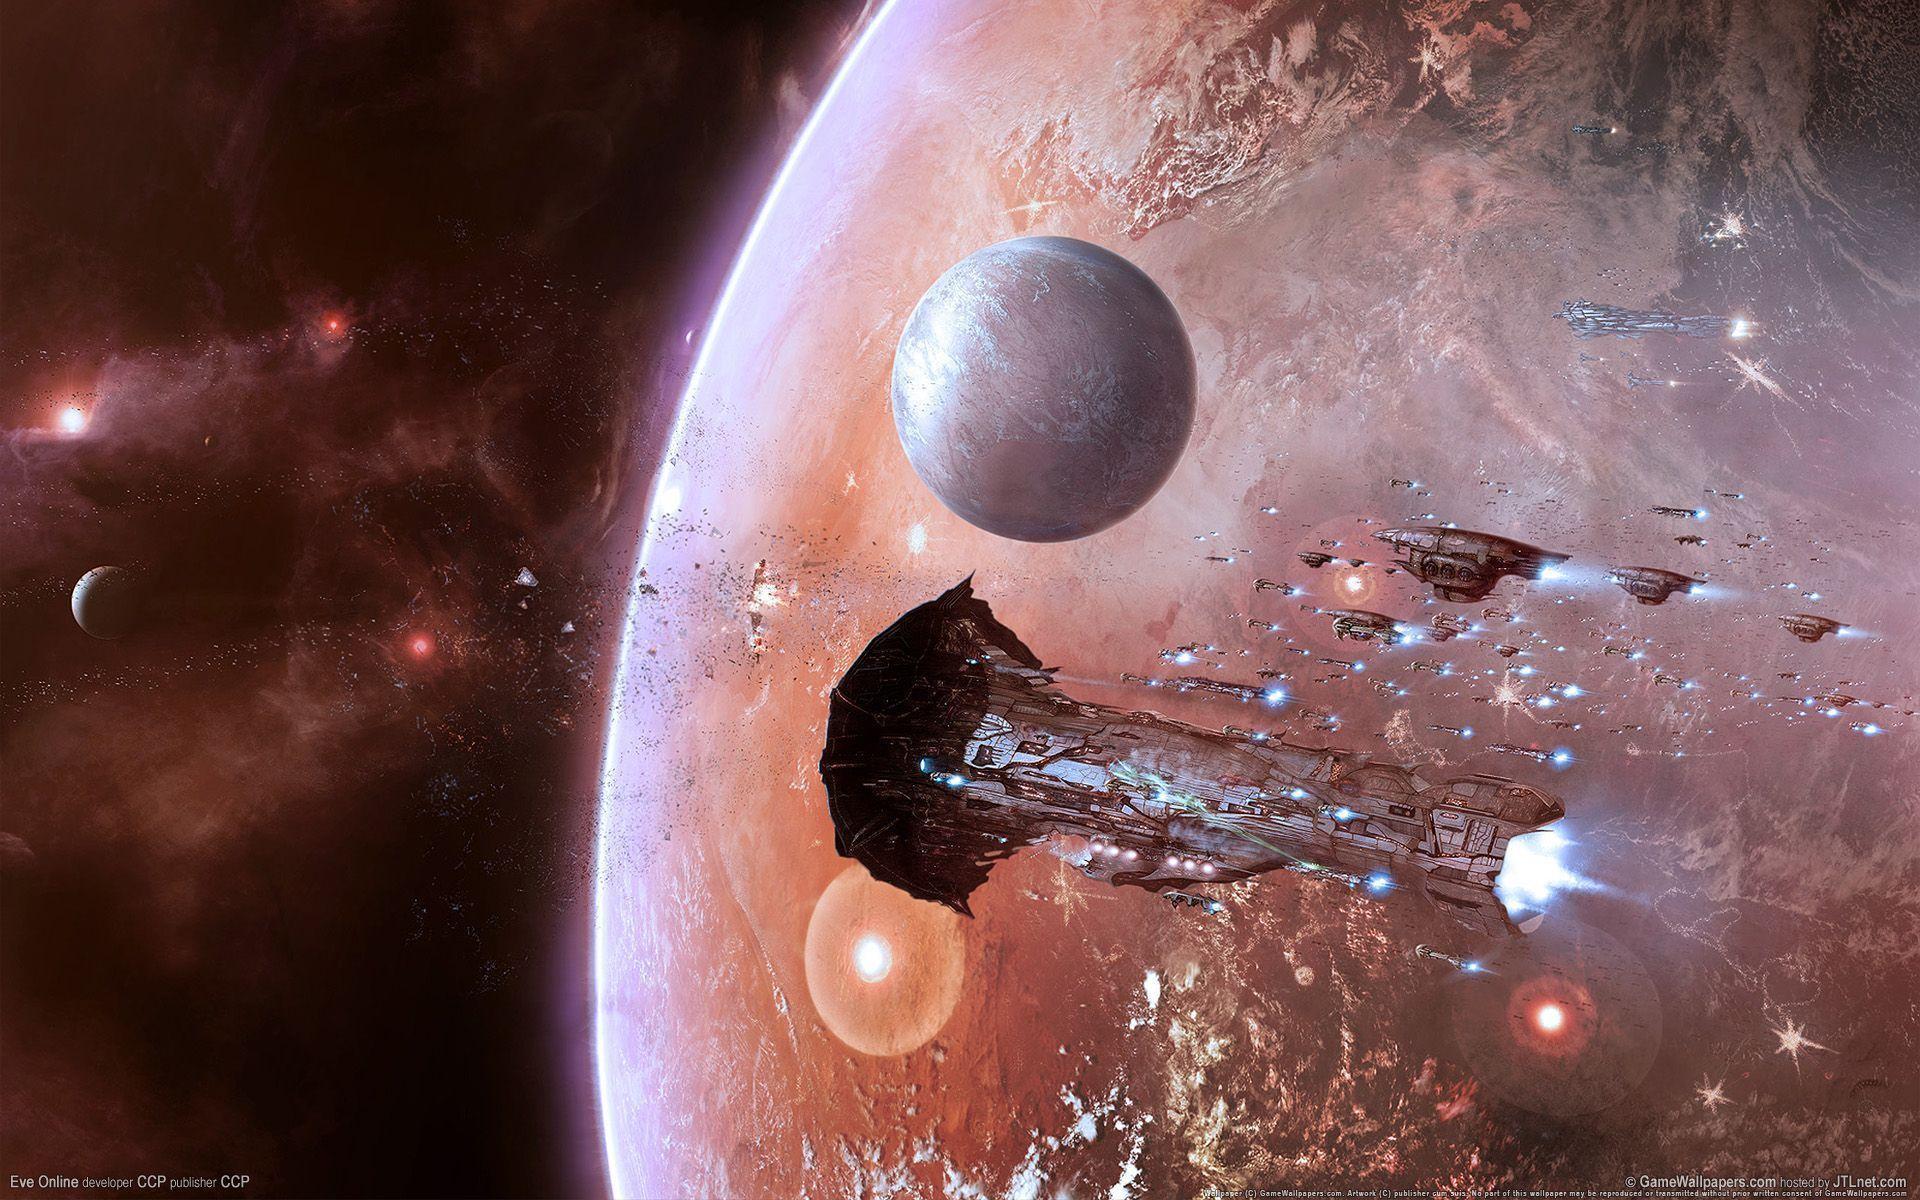 Eve Online Game 1920×1200 Definition Wallpaper. Daily